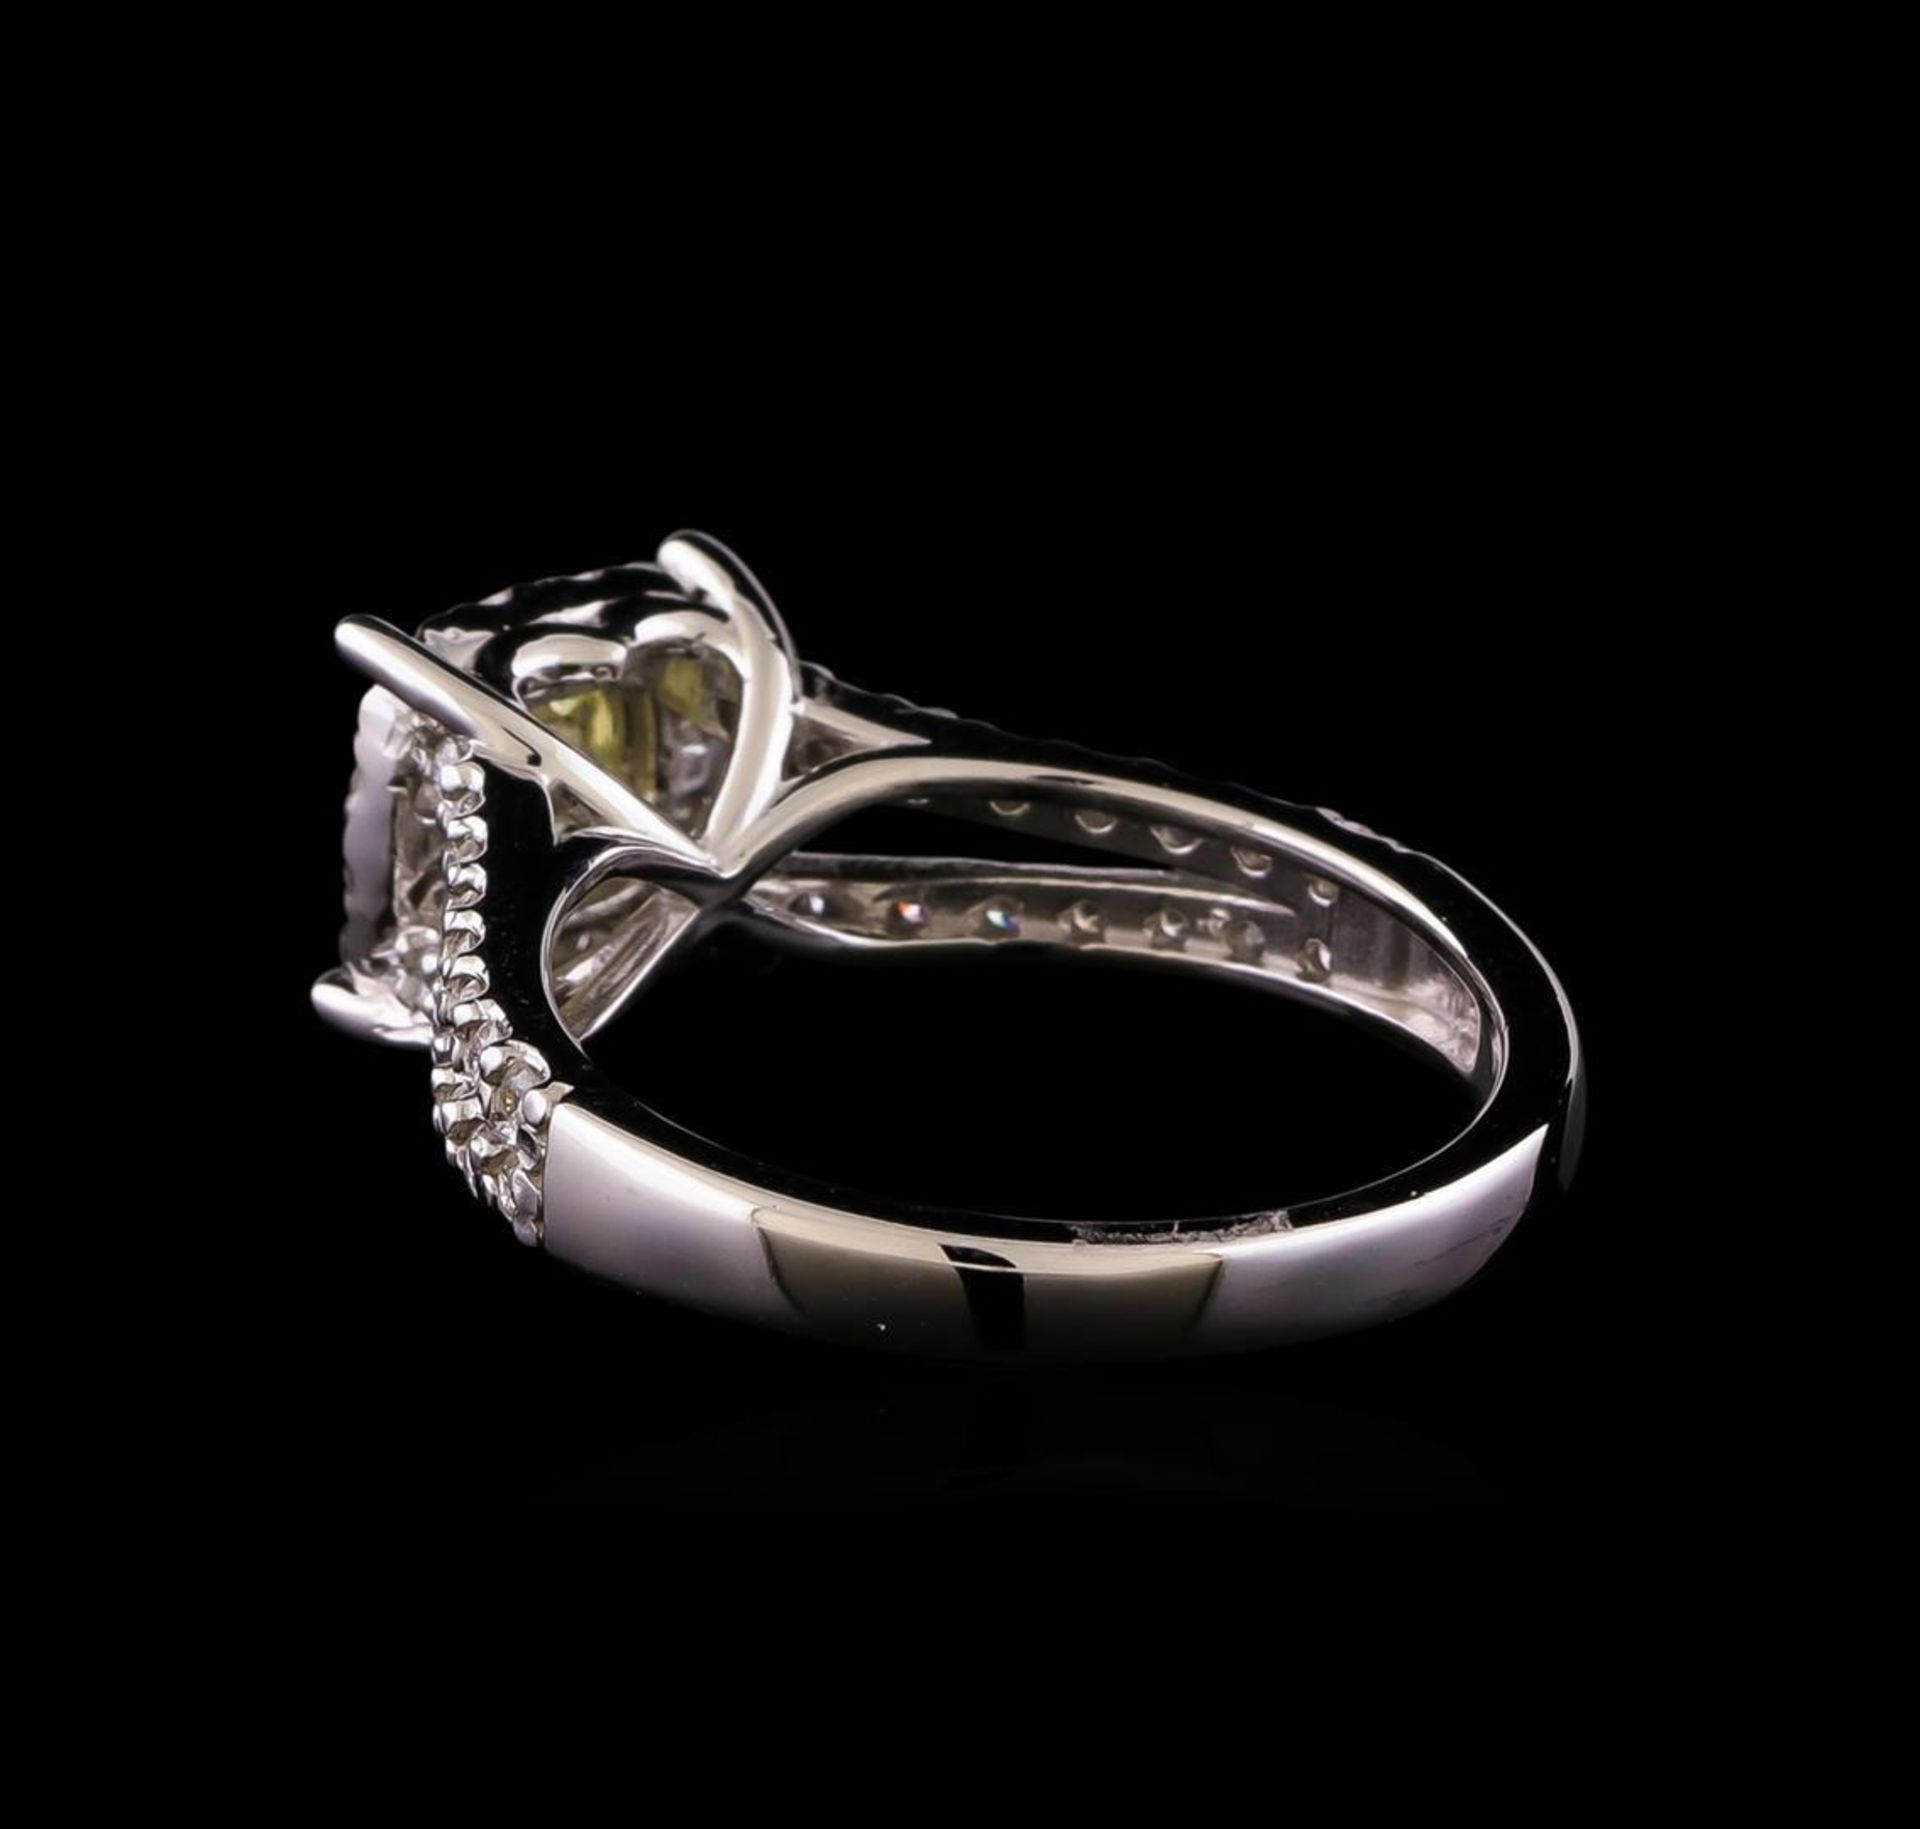 1.09 ctw Fancy Yellow Diamond Ring - 14KT White Gold - Image 3 of 5